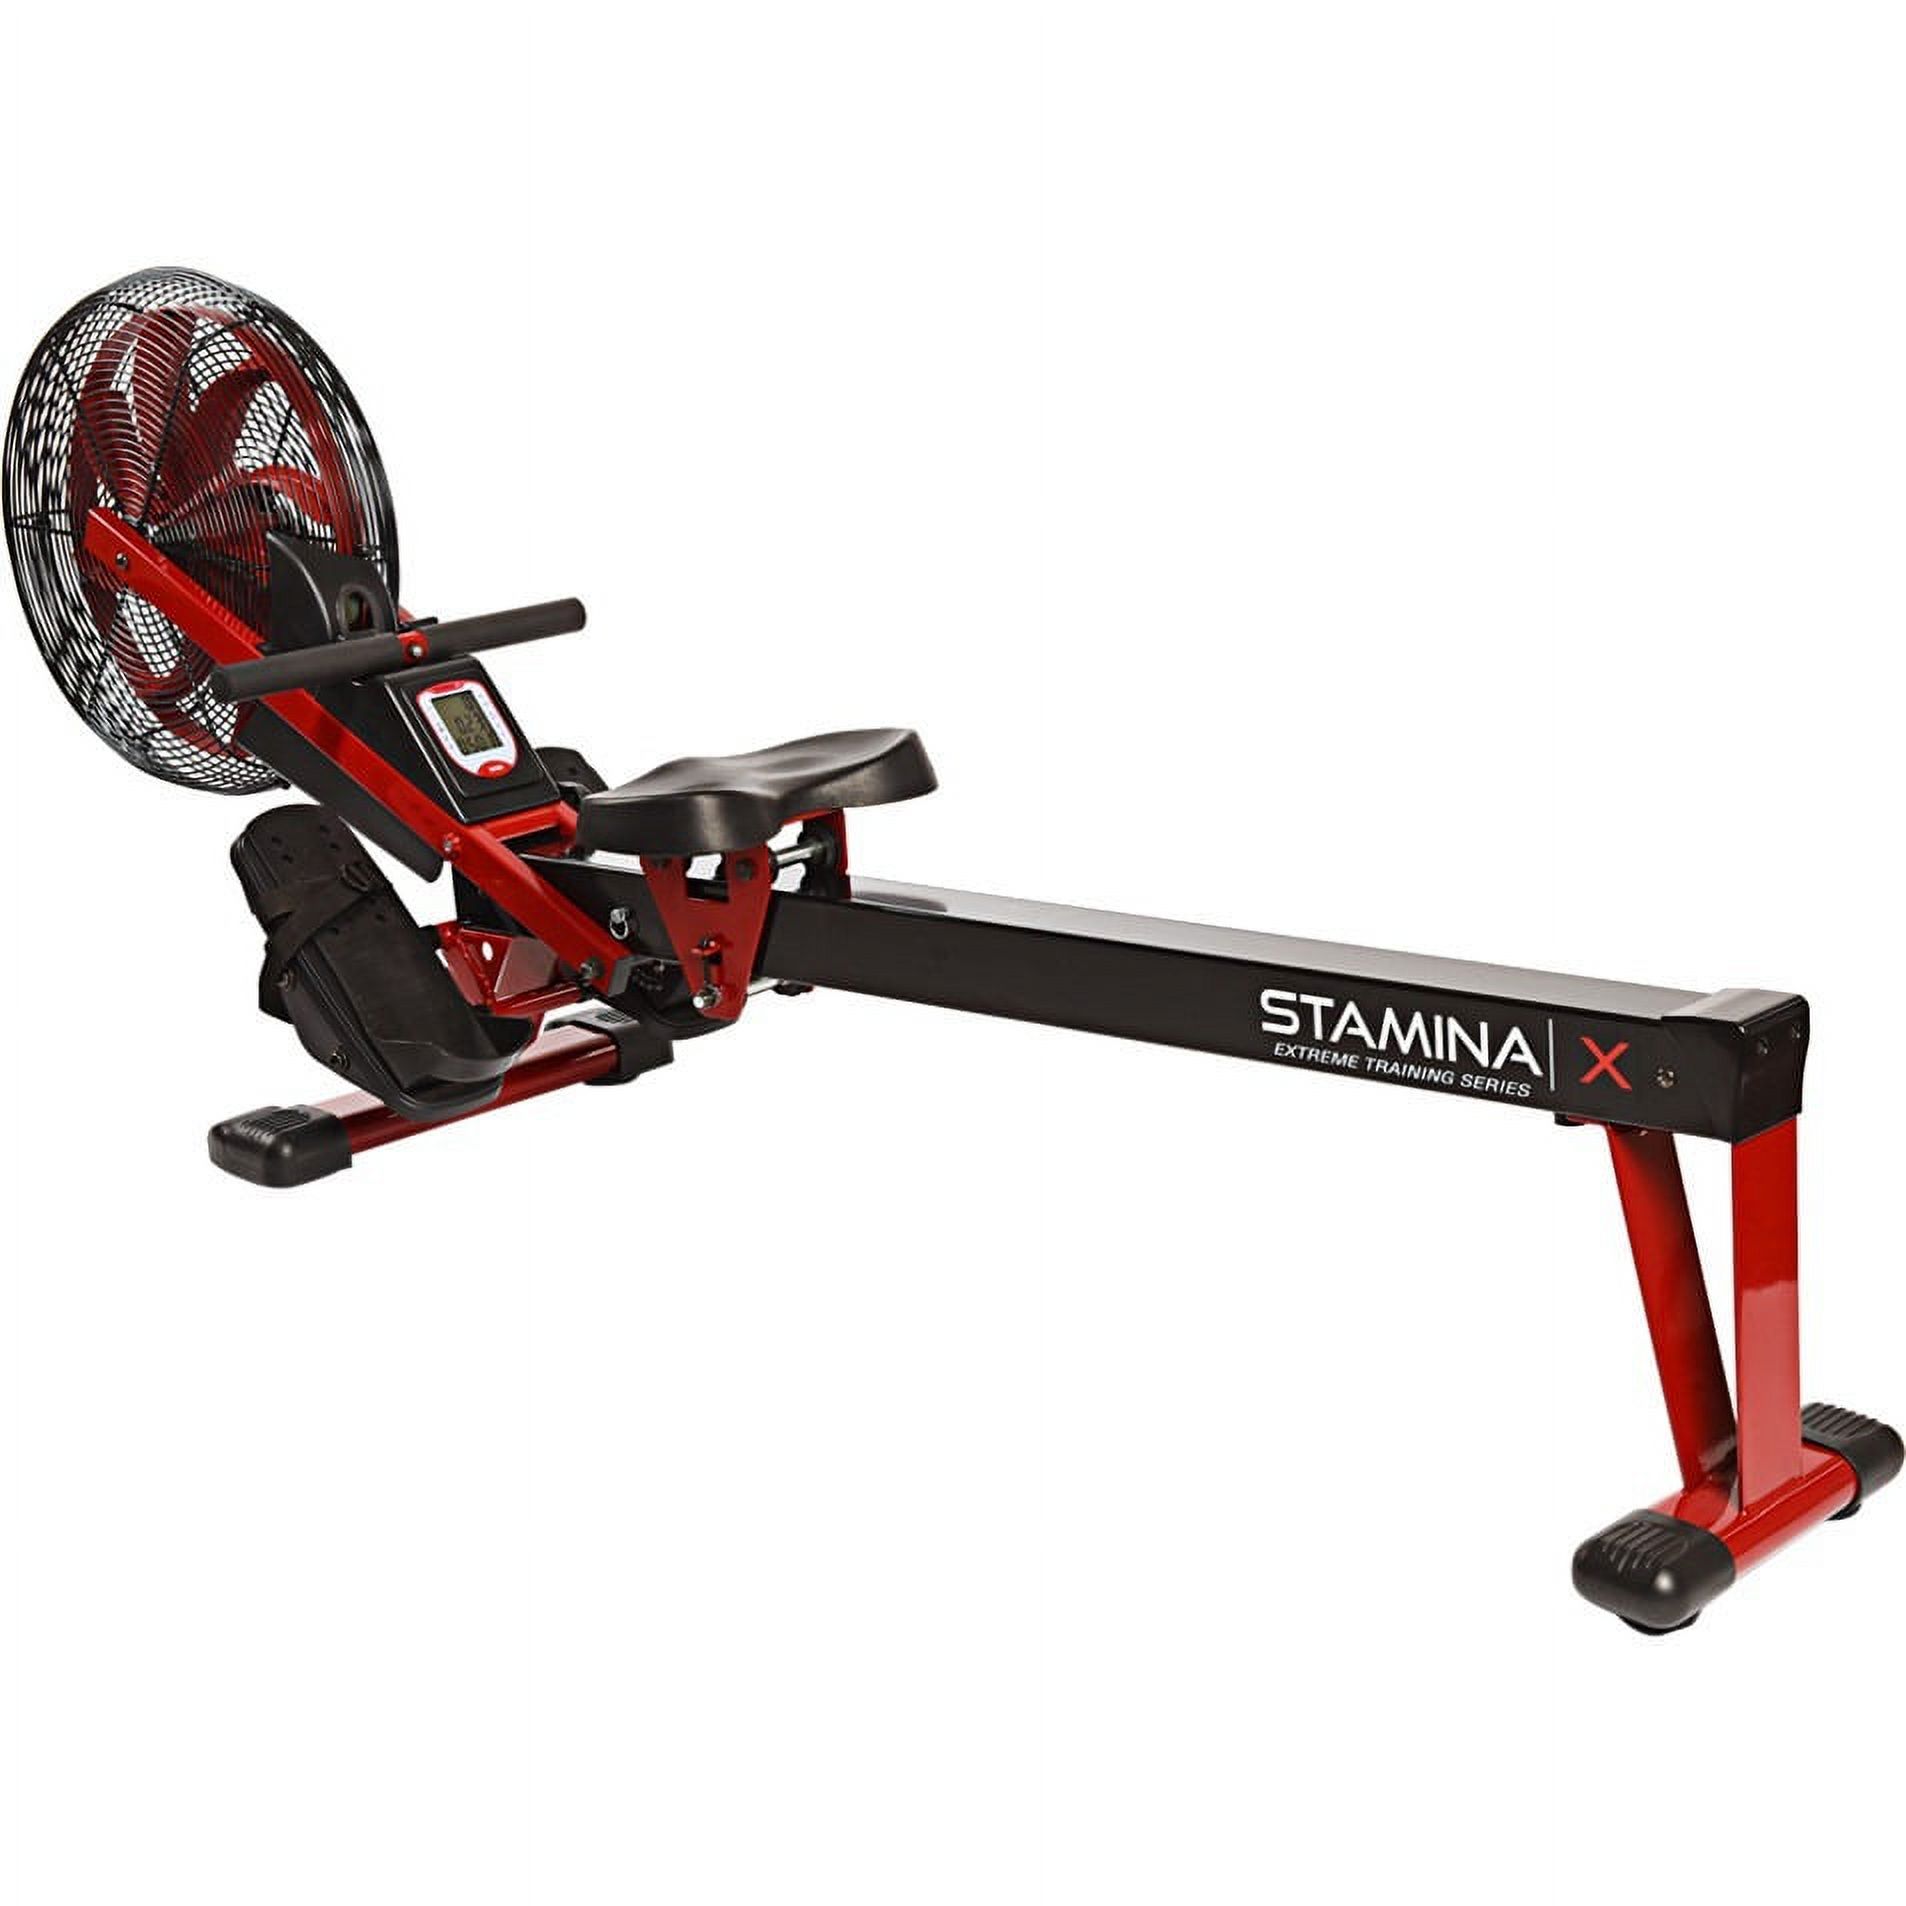 Stamina Exercise Foldable X Air Rower Rowing Machine w/ LCD Display, Red - image 1 of 7